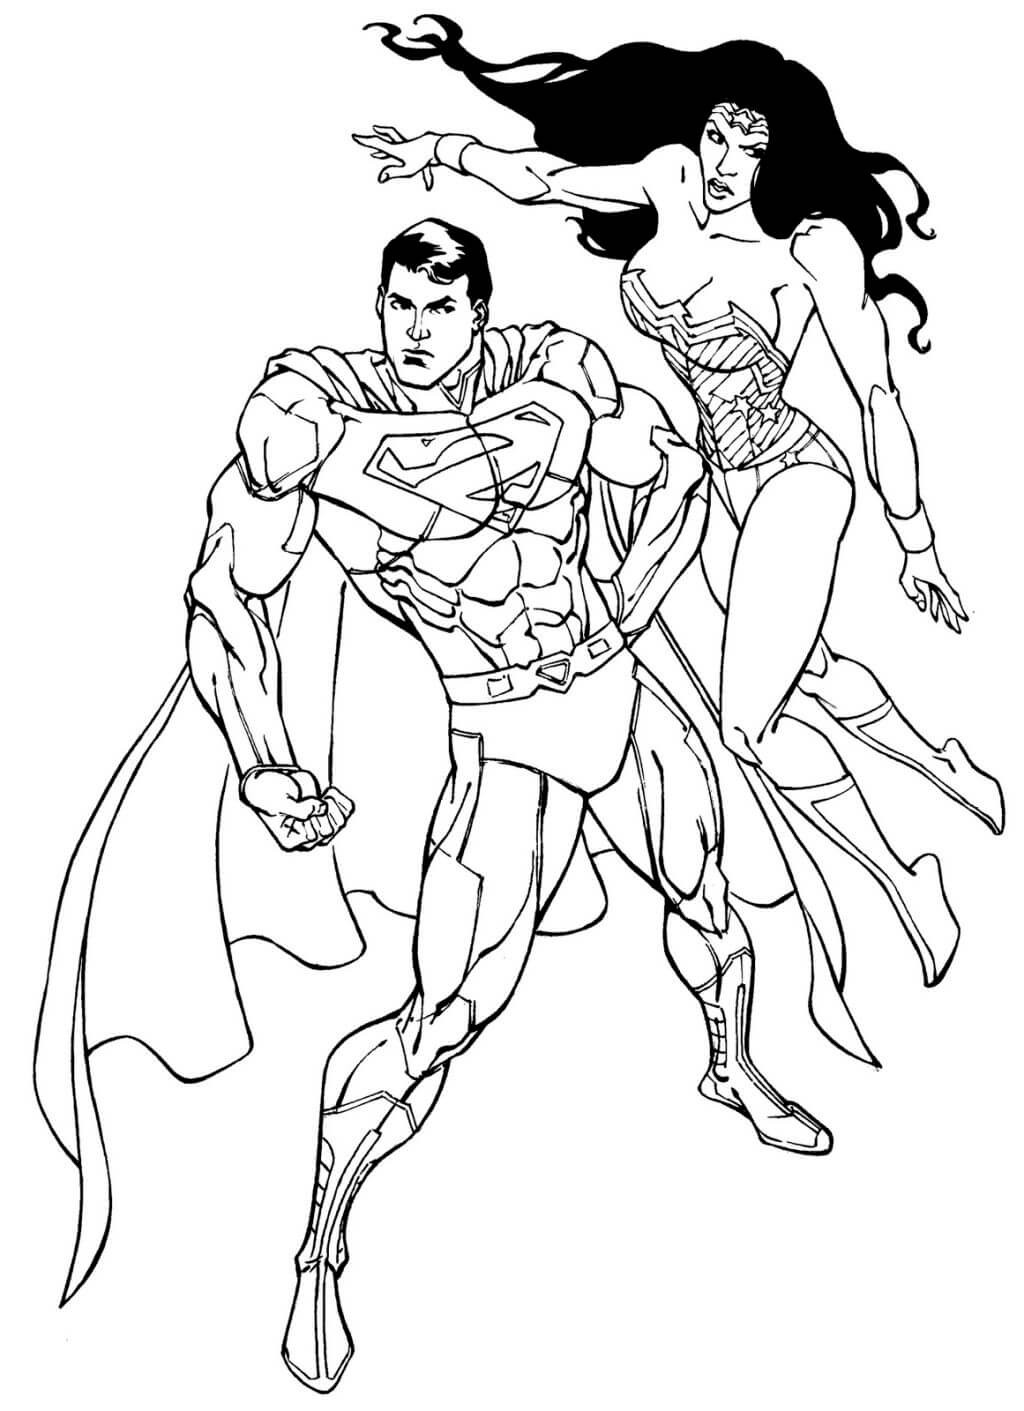 Wonder Woman Coloring Pages For Kids
 wonder woman logo coloring pages Coloring Pages For Kids